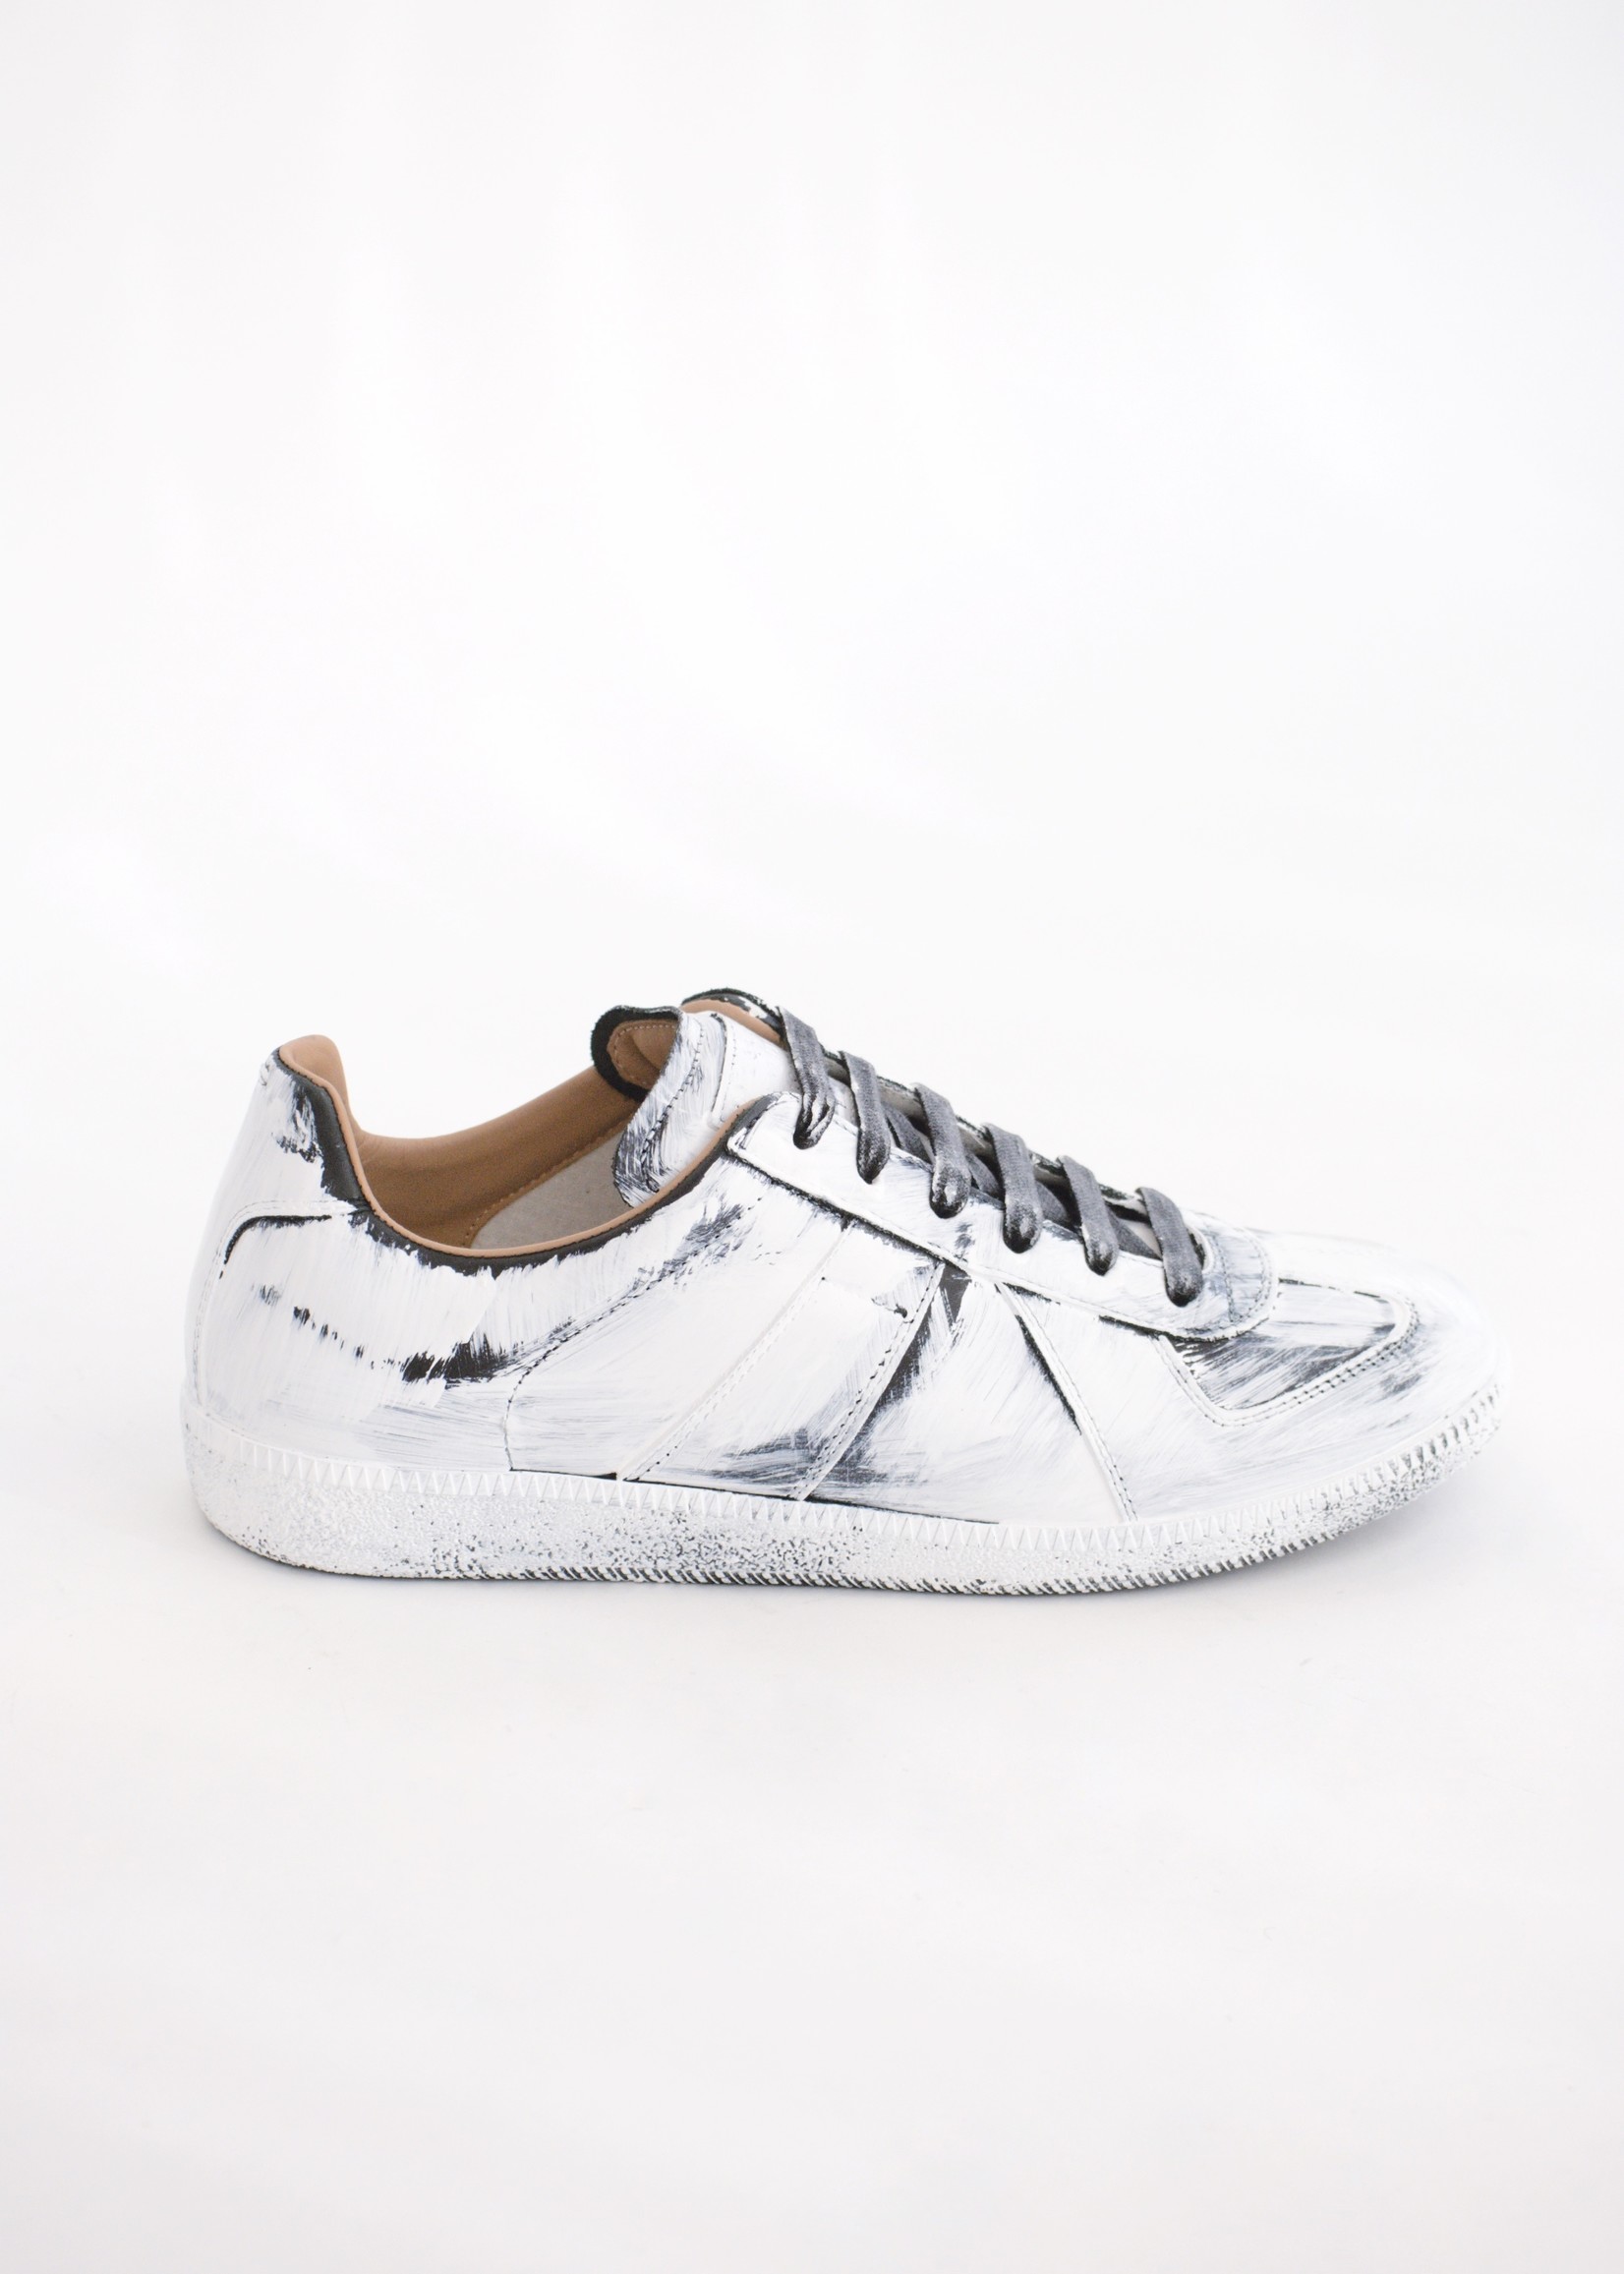 Maison Margiela Hand Painted Replica Sneakers in Black and White